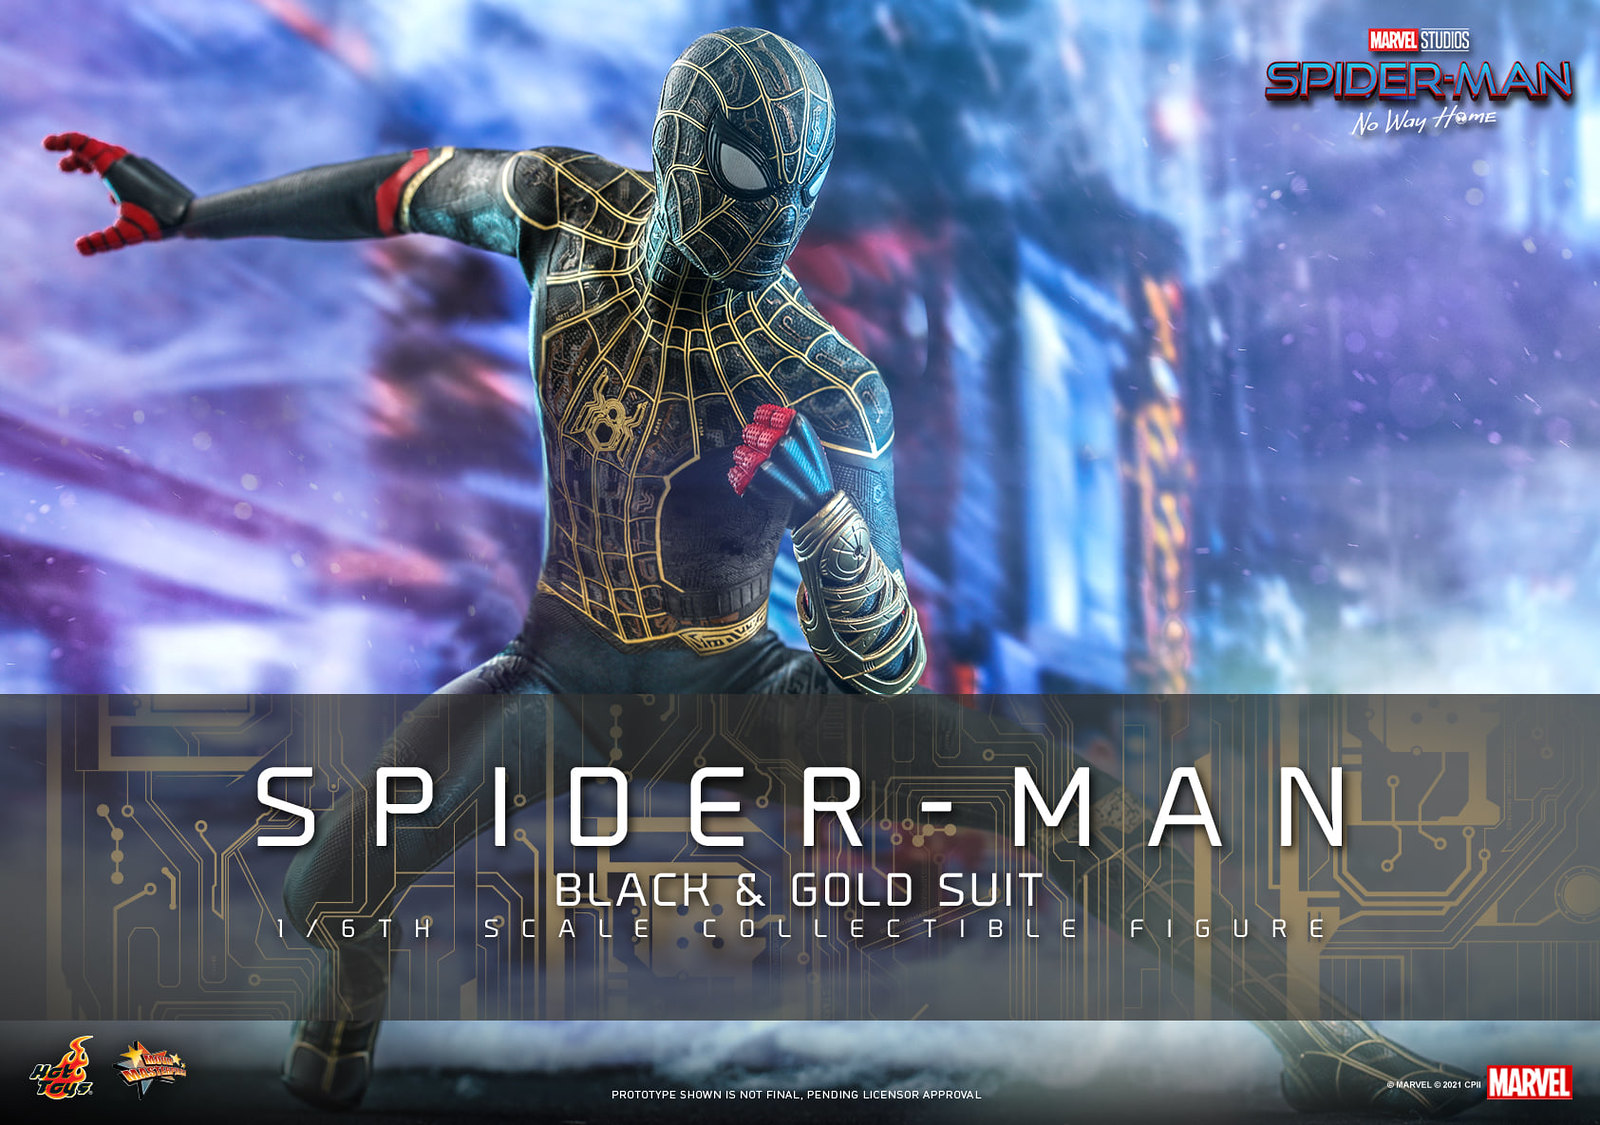 NEW PRODUCT: Hot Toys 【Spider-Man: No Way Home - 1/6th scale Spider-Man (Black & Gold Suit) Collectible Figure】 51311991519_4ded929e67_h